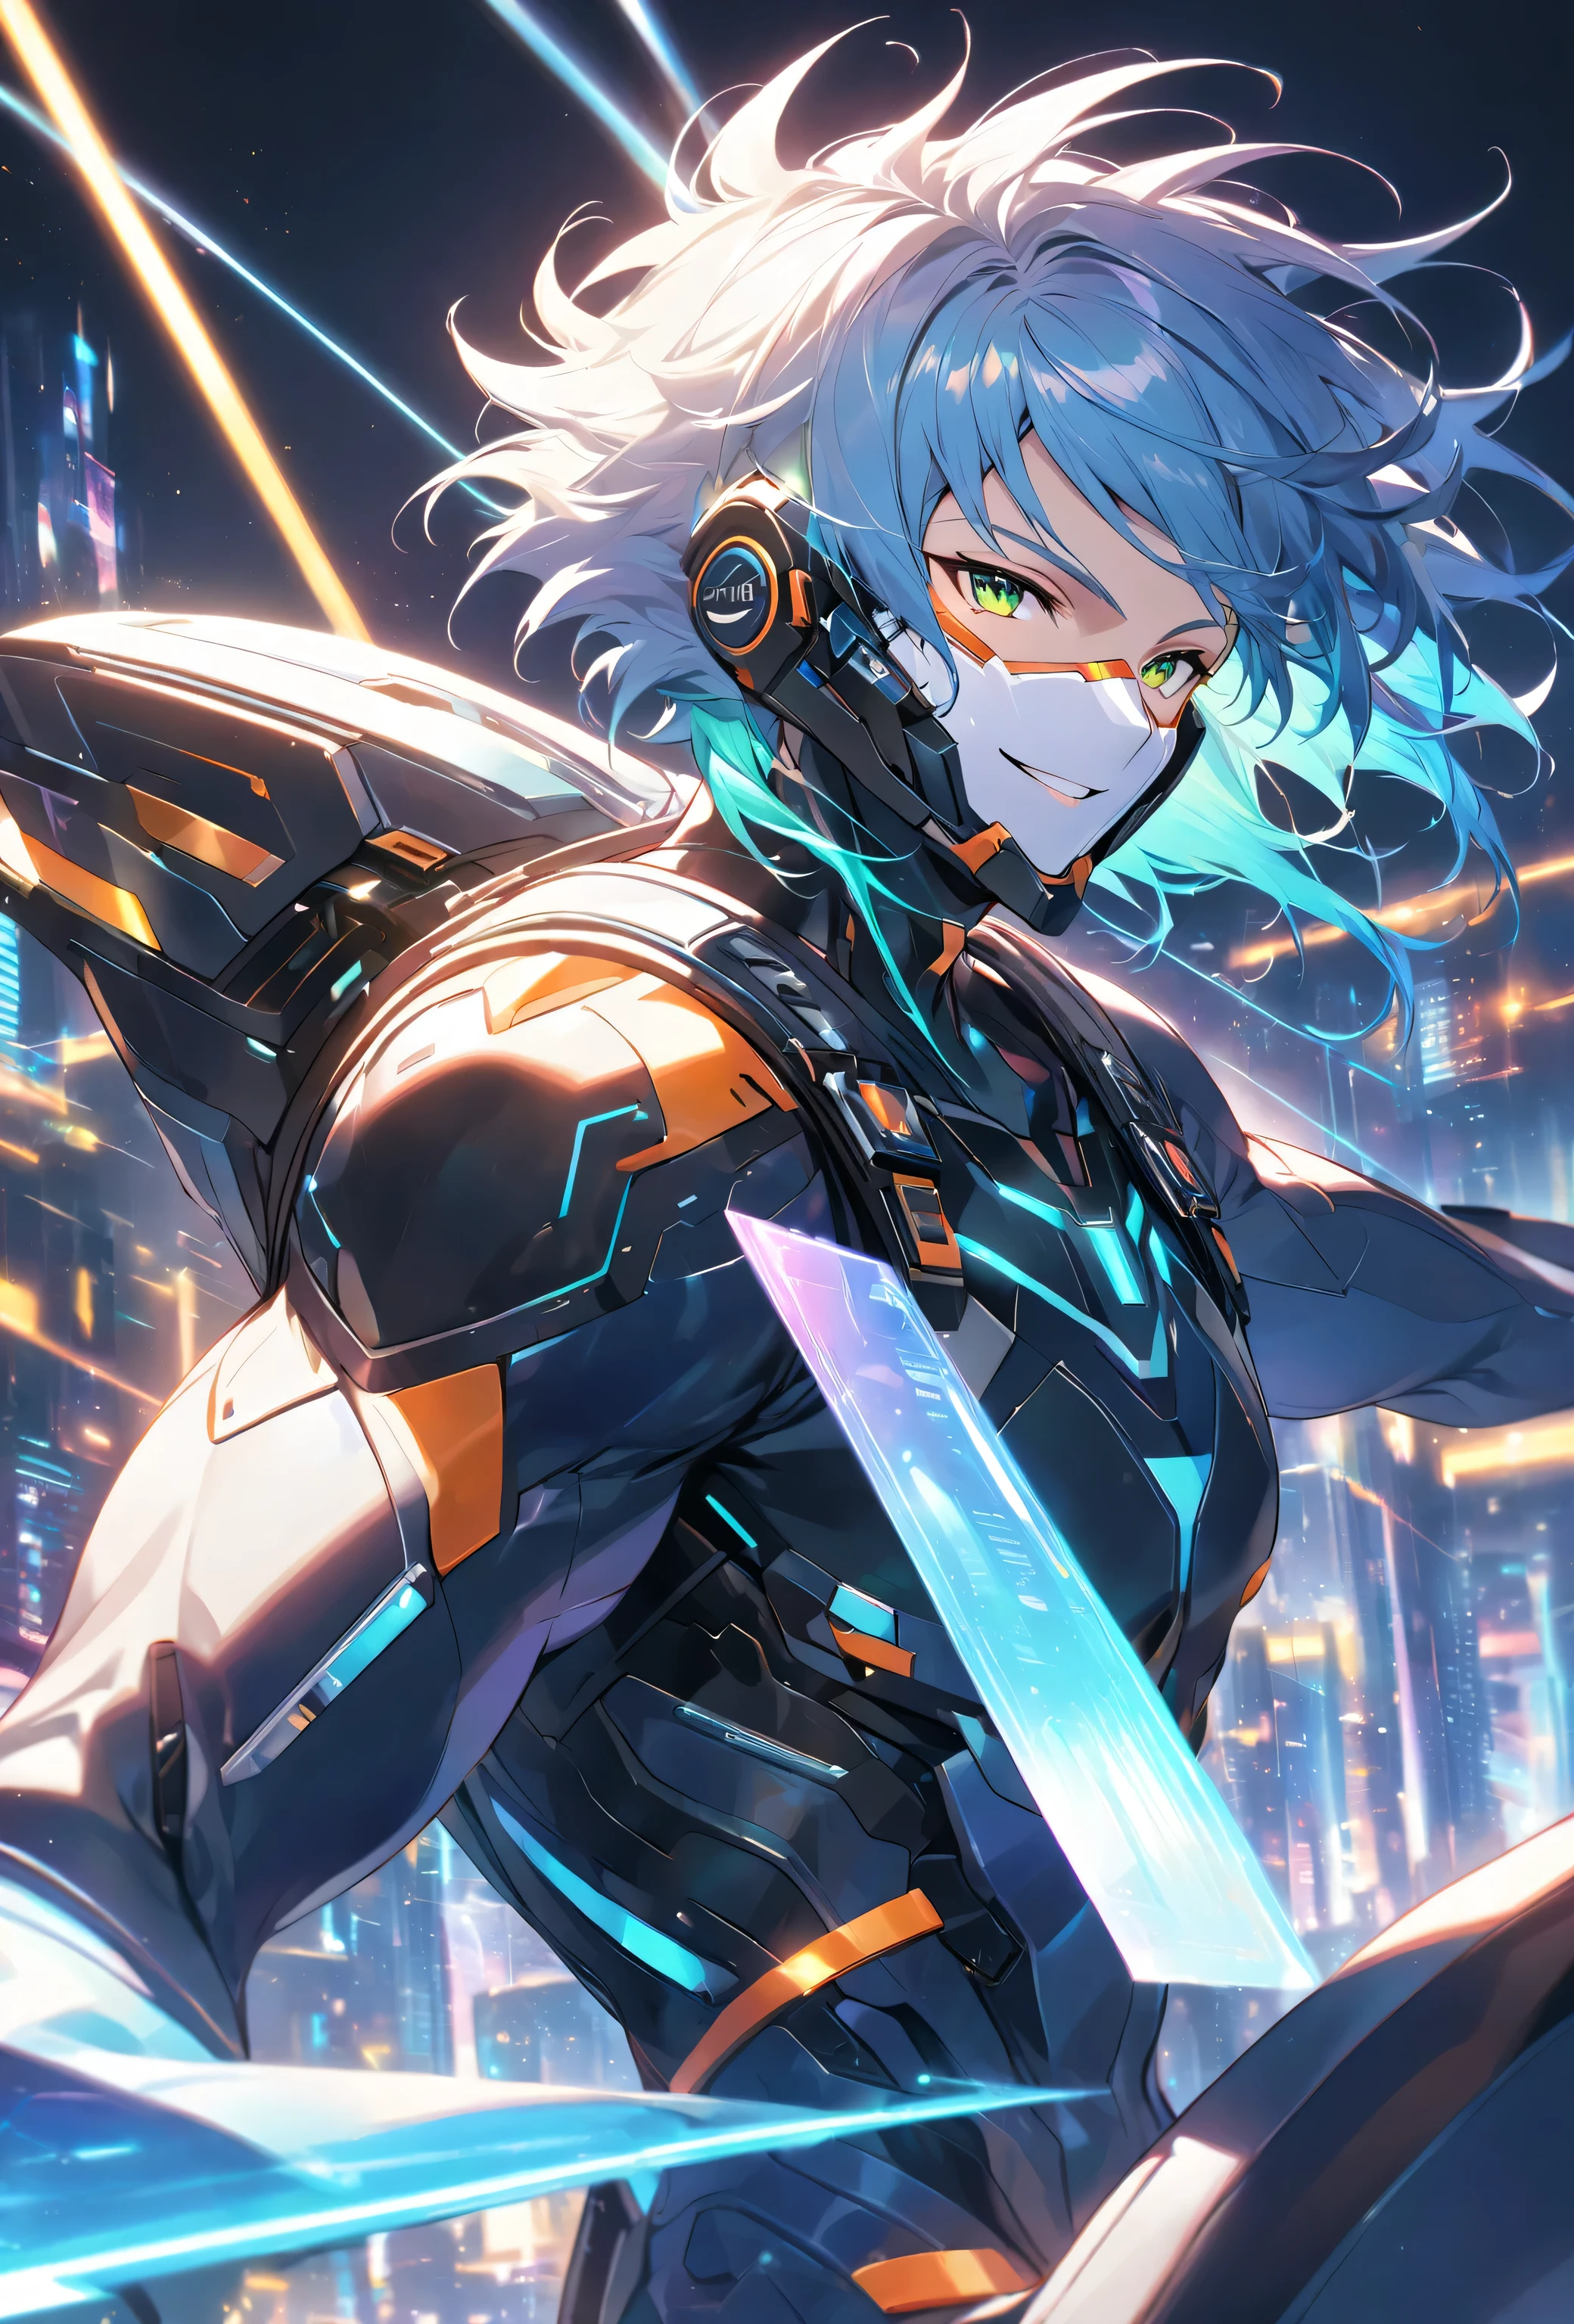 A friendly and charismatic male character in a futuristic black and blue cyber suit with glowing LED lines, short spiky blue hair, and sharp green eyes. He is tall, muscular, and has an energy backpack on his back. The character is smiling warmly and in a relaxed posture, exuding a welcoming and approachable aura. The background is a digital cityscape with floating holographic elements and light effects, representing a cybernetic world.,Face masks,Pale-white glowing forehead protector,